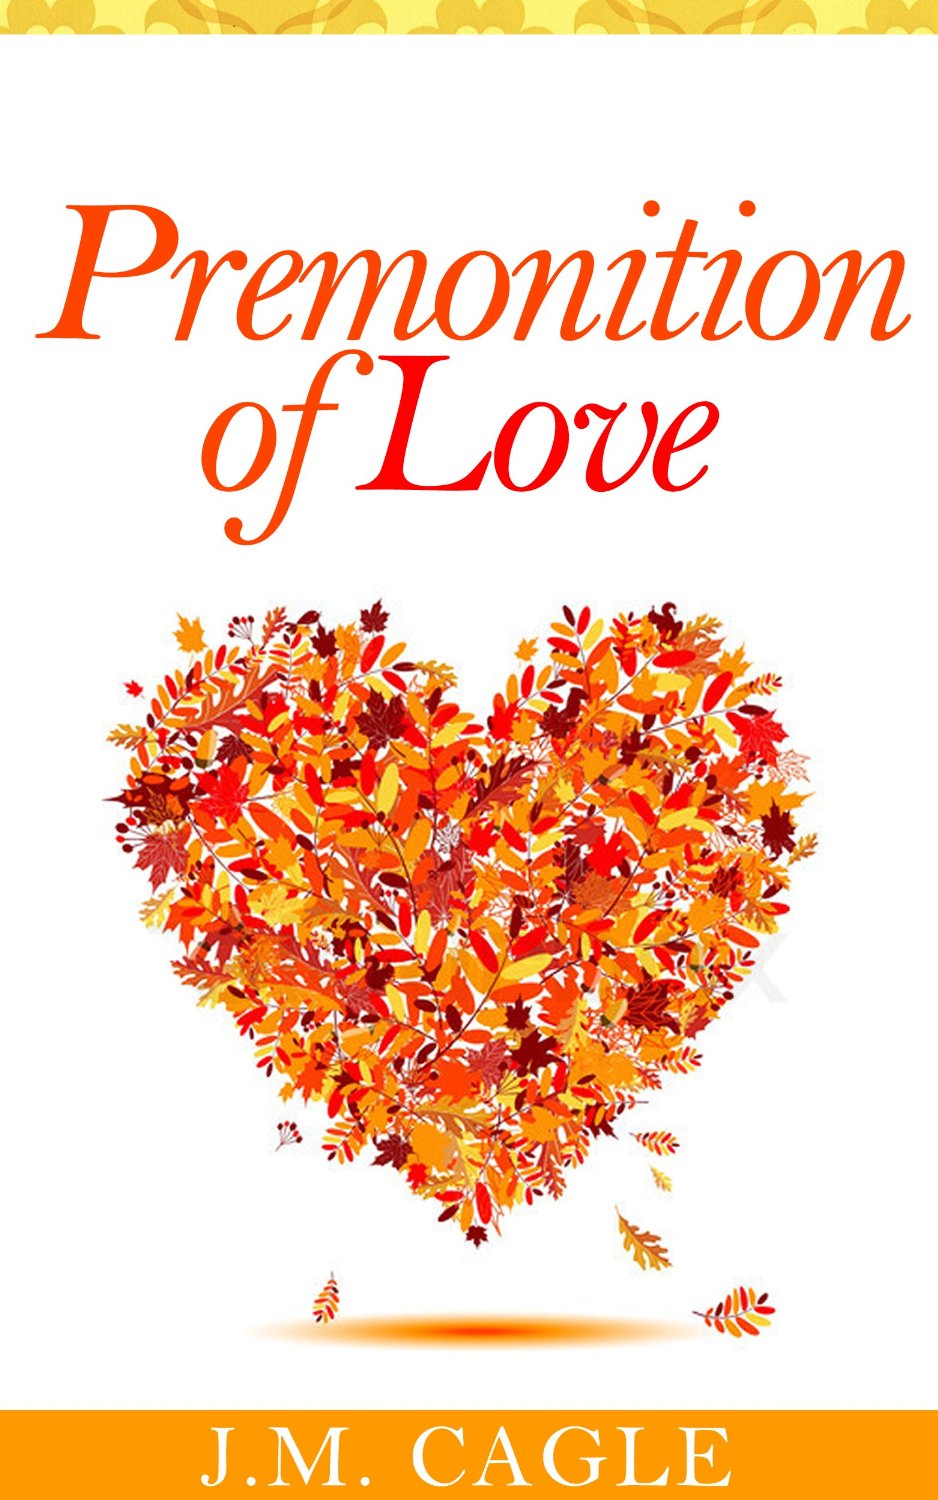 Premonition of Love by J.M. Cagle